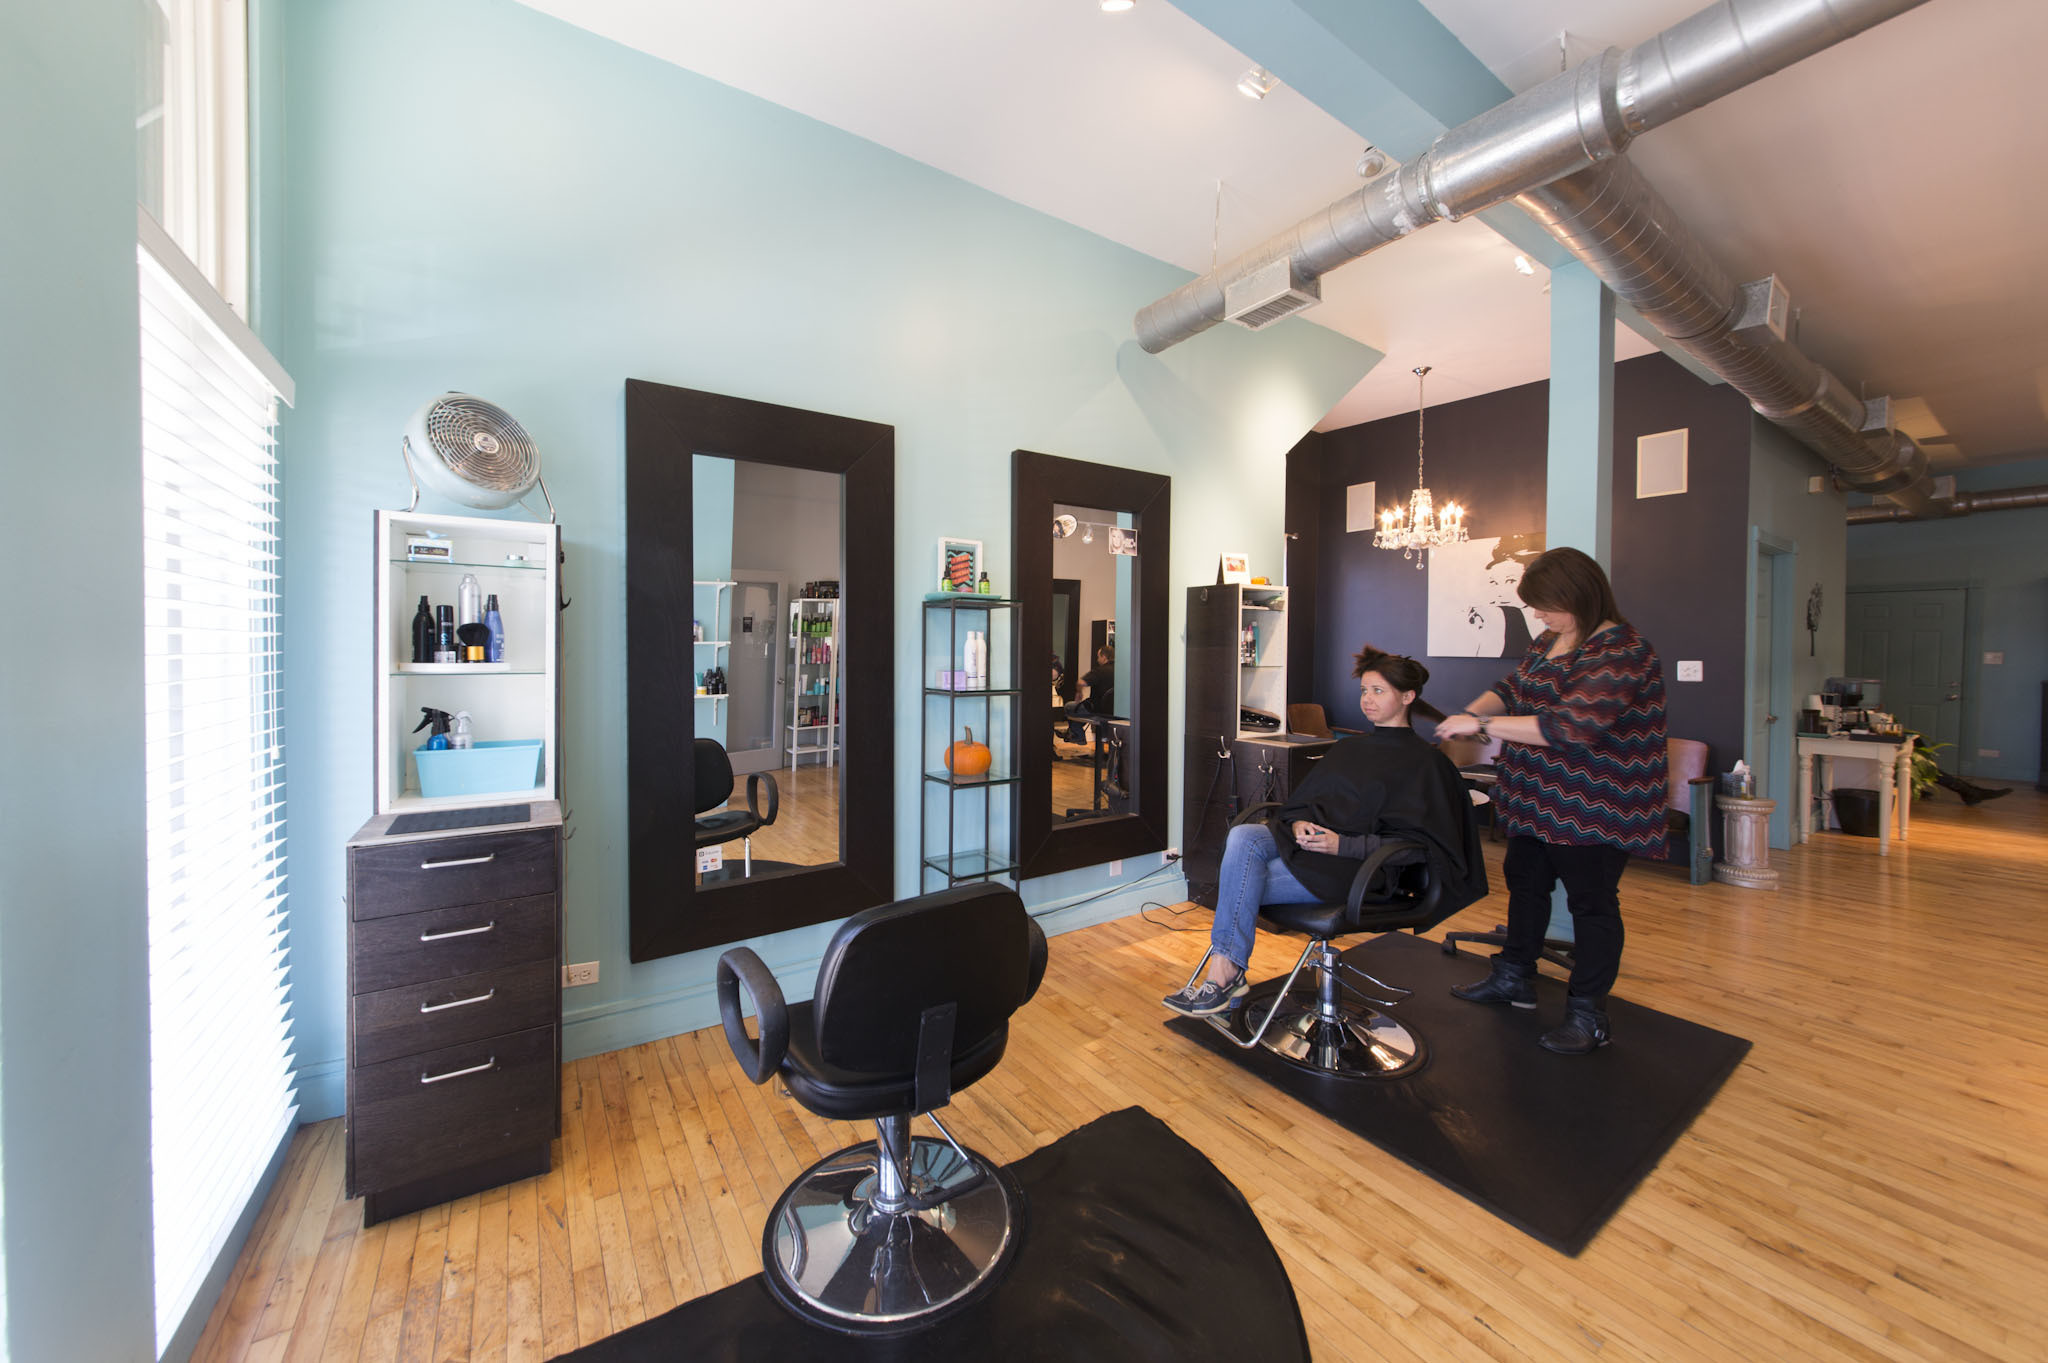 Kids Hair Cut Chicago
 The best spas in Chicago for massages manicures and more